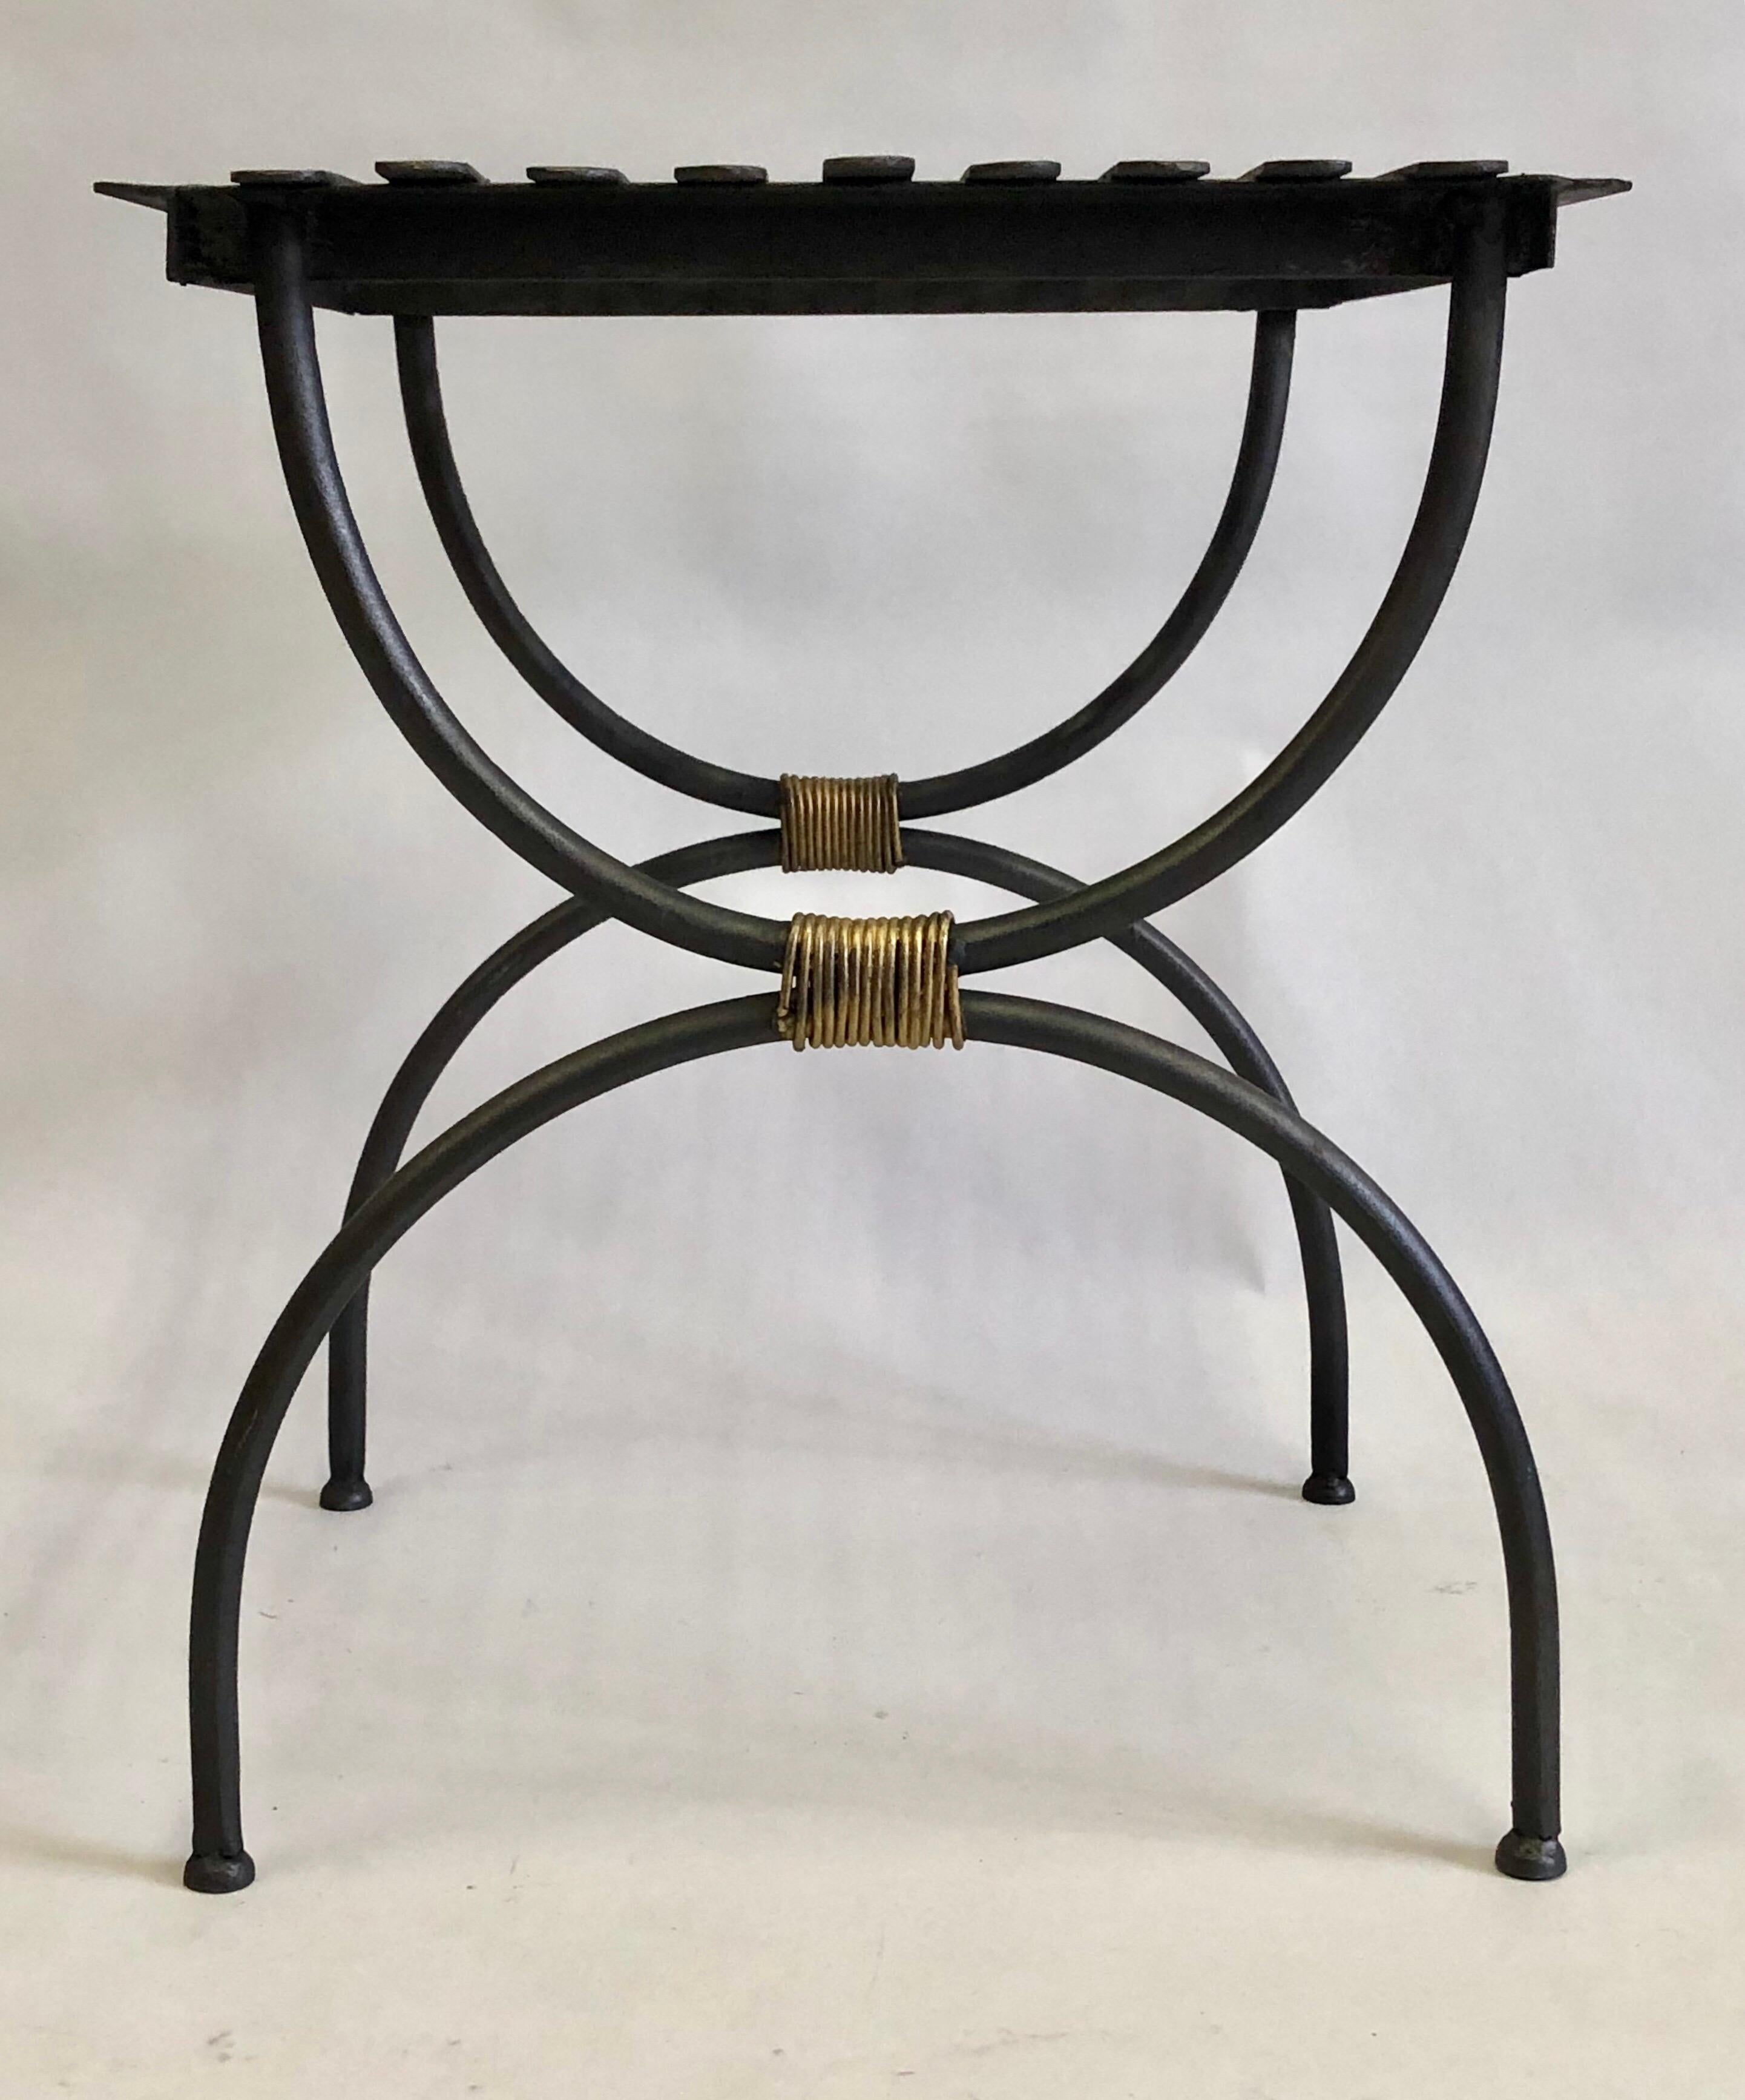 Gilt Pair of French Modern Neoclassical Iron Bench / Luggage Racks For Sale